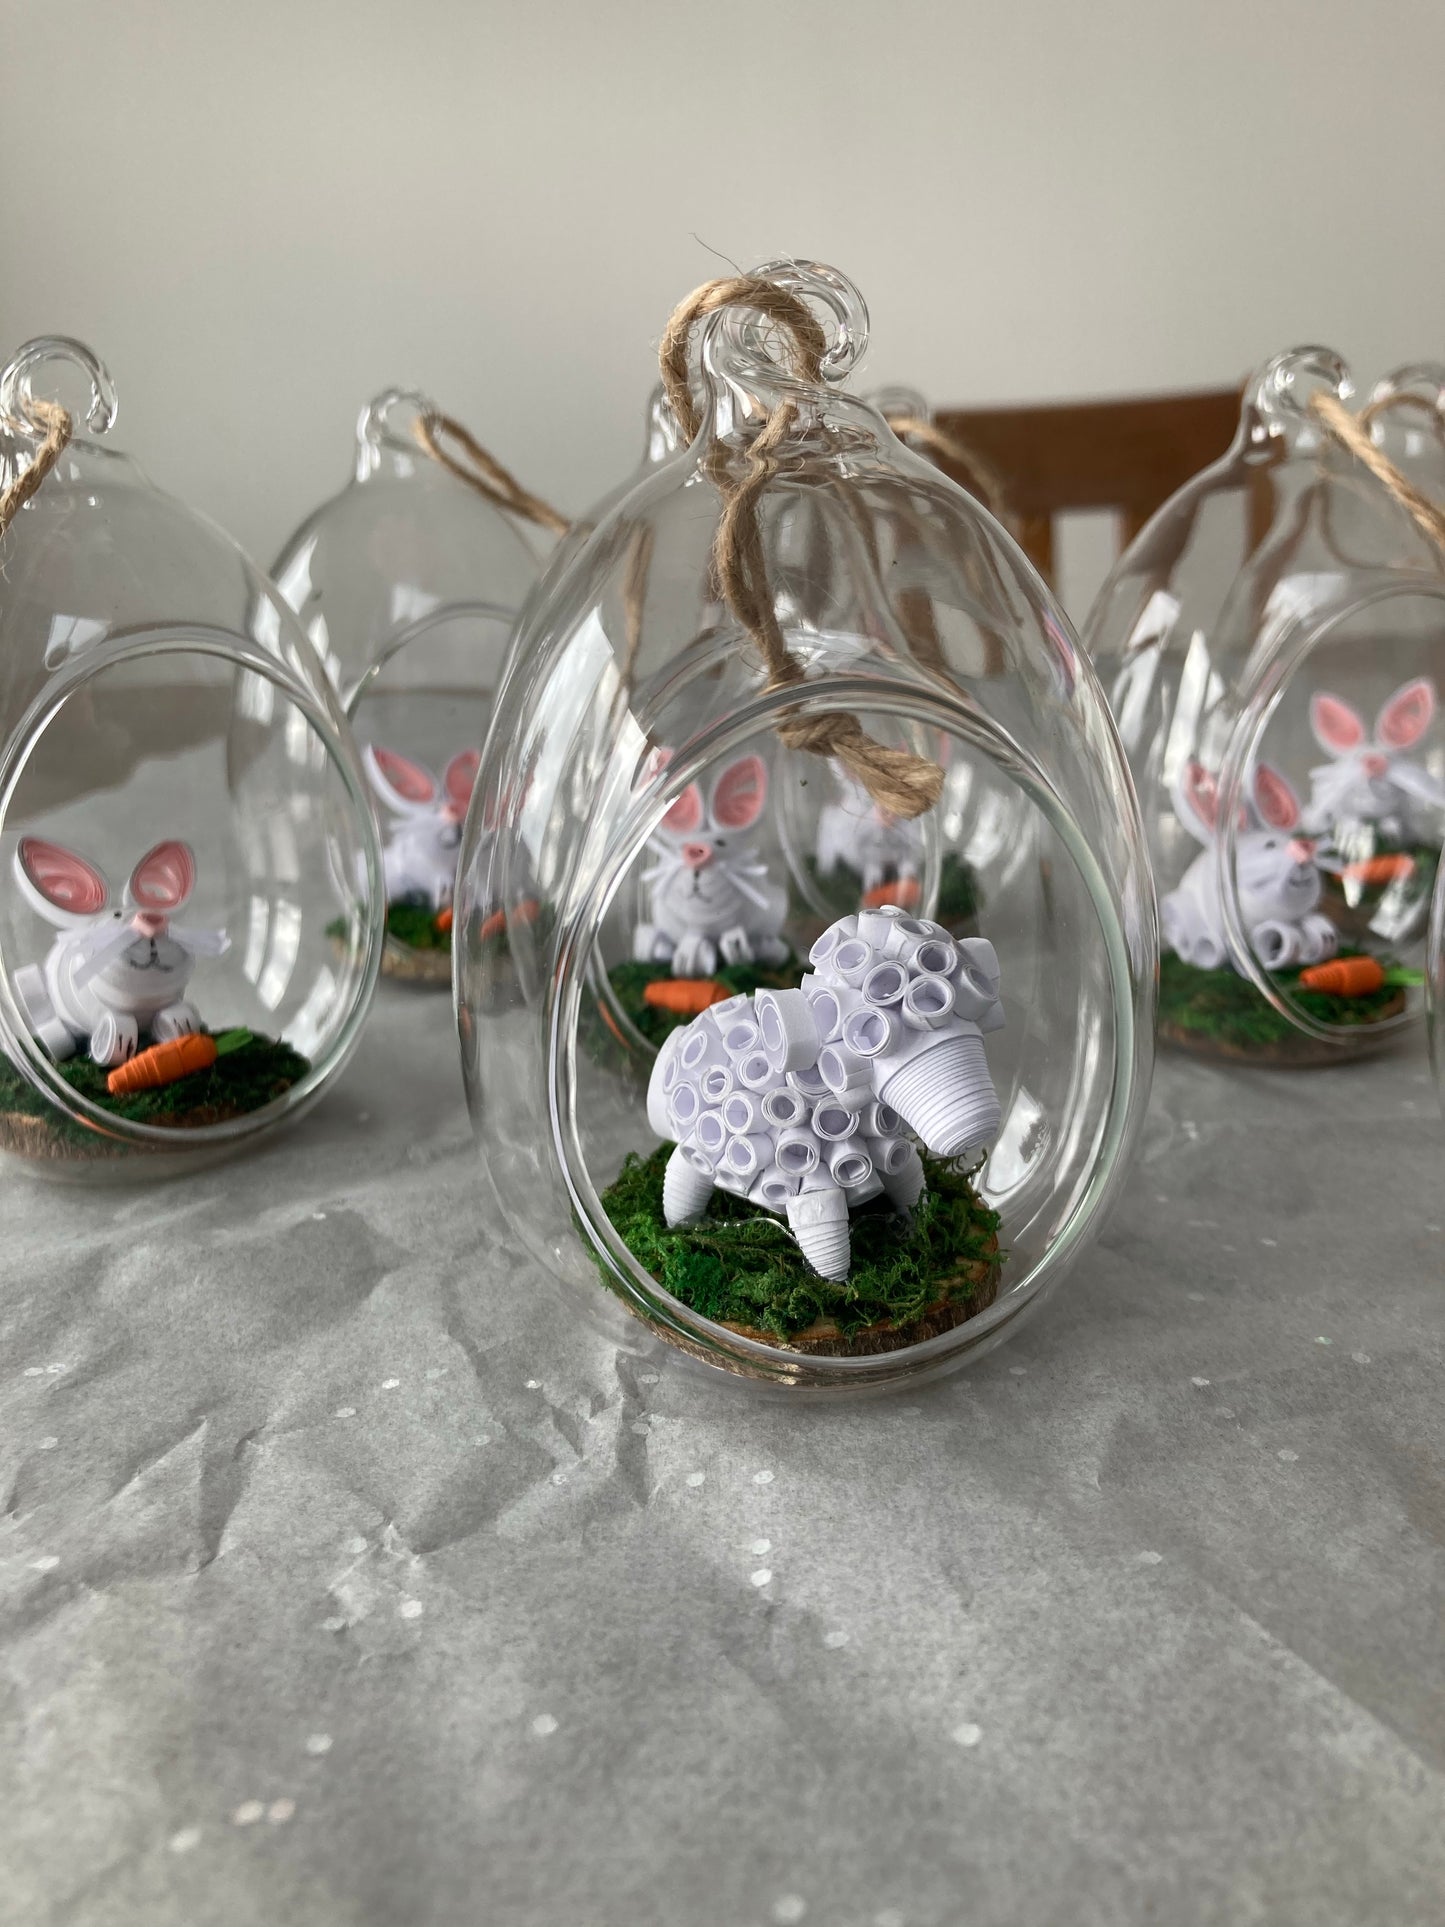 Sheep Easter decoration